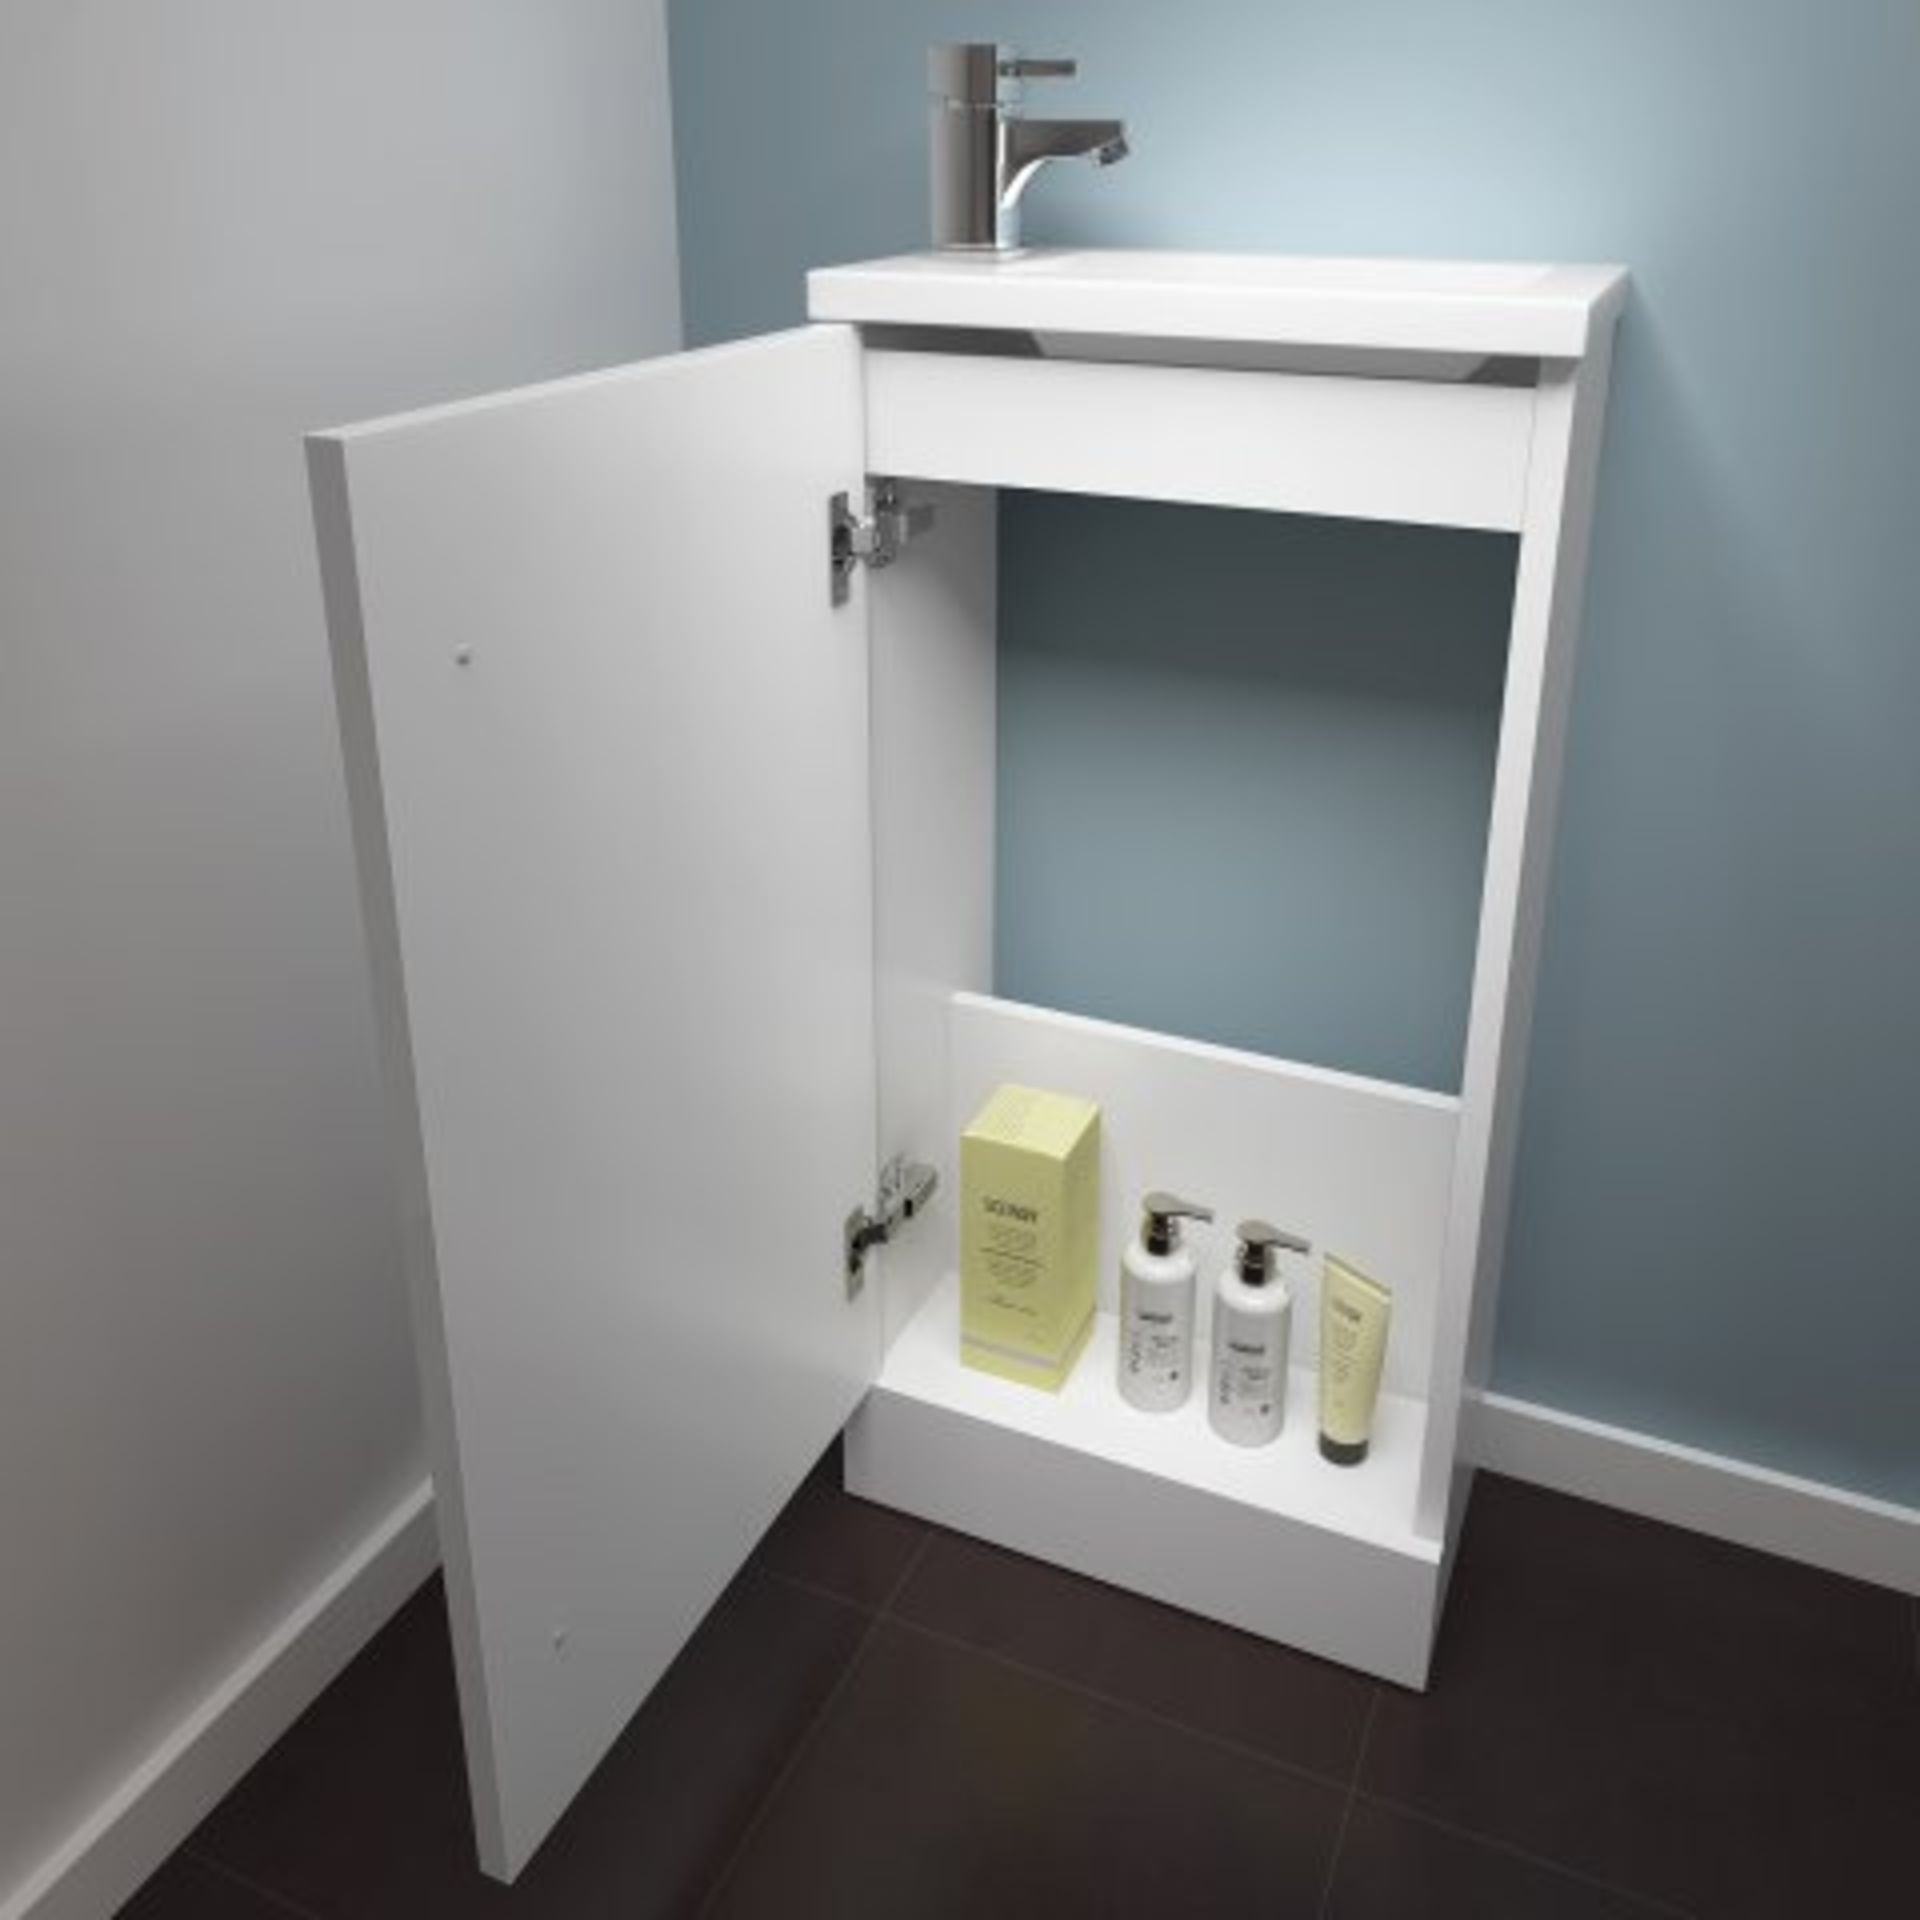 (K183) 400mm Blanc Matte White Basin Unit - Floor Standing. RRP £199.99. With its contemporary, - Image 2 of 4